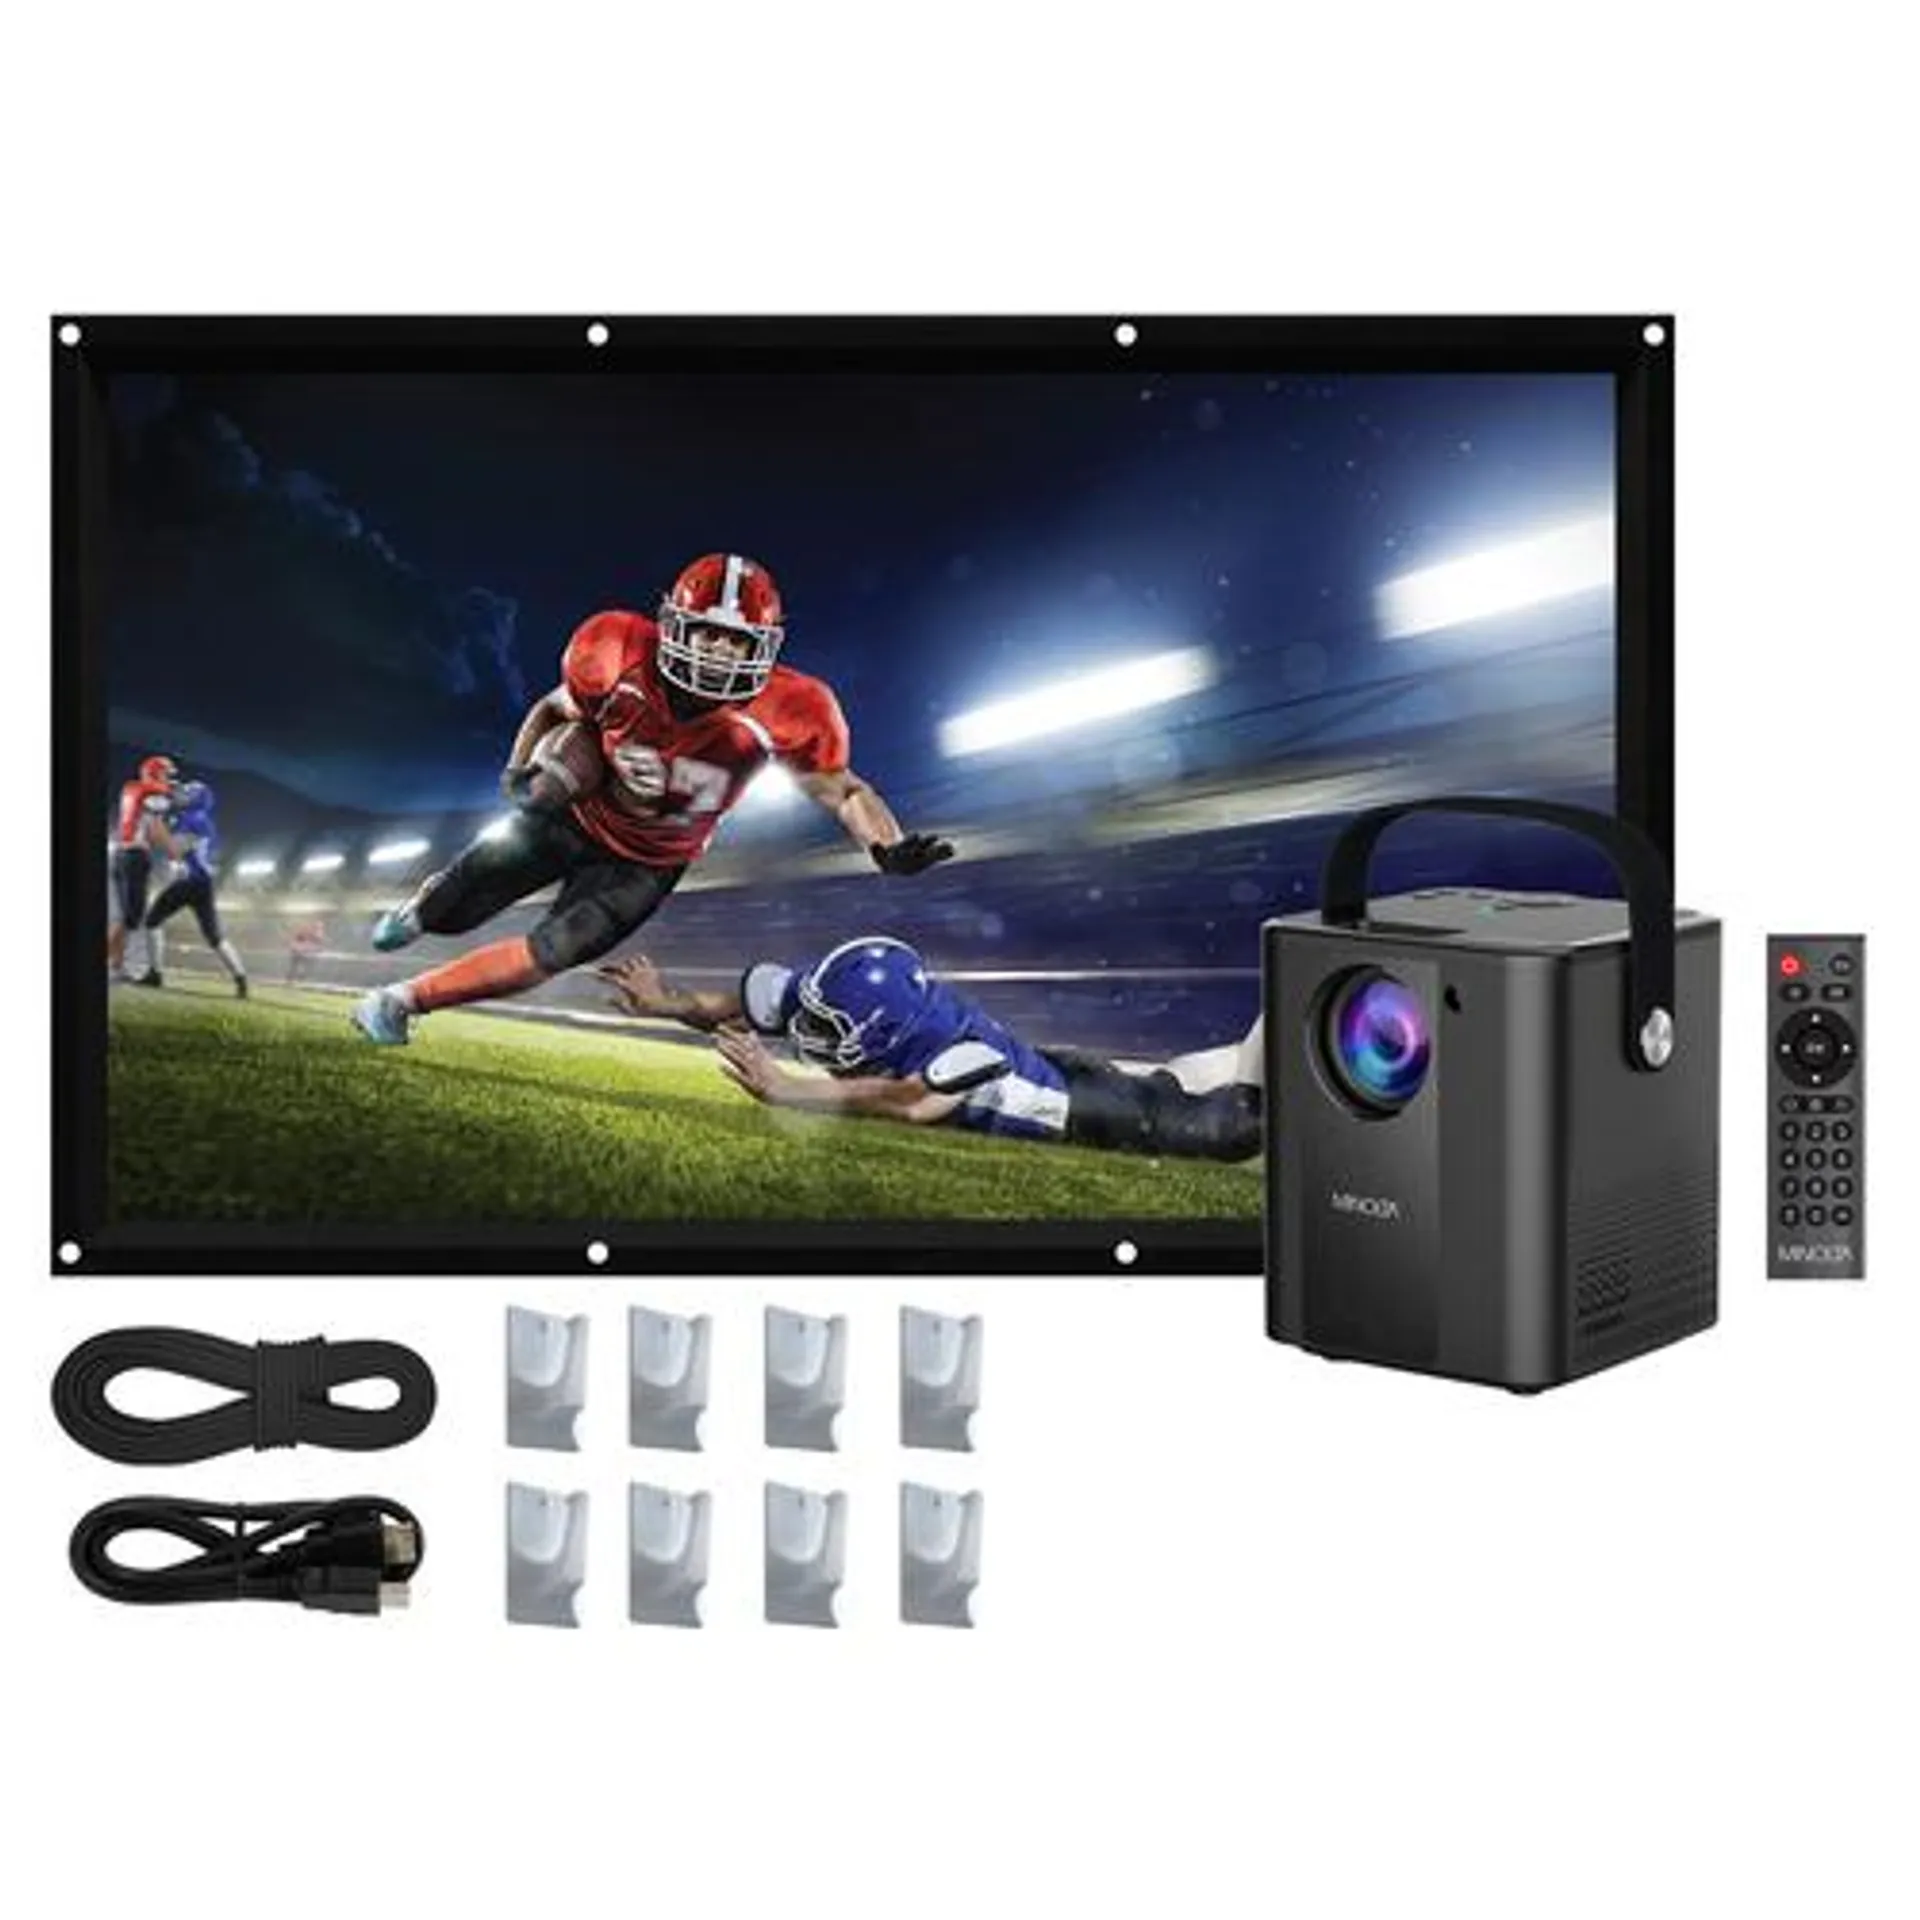 Minolta MN674 Portable Projector Bundle Pack With 100 Inch Screen